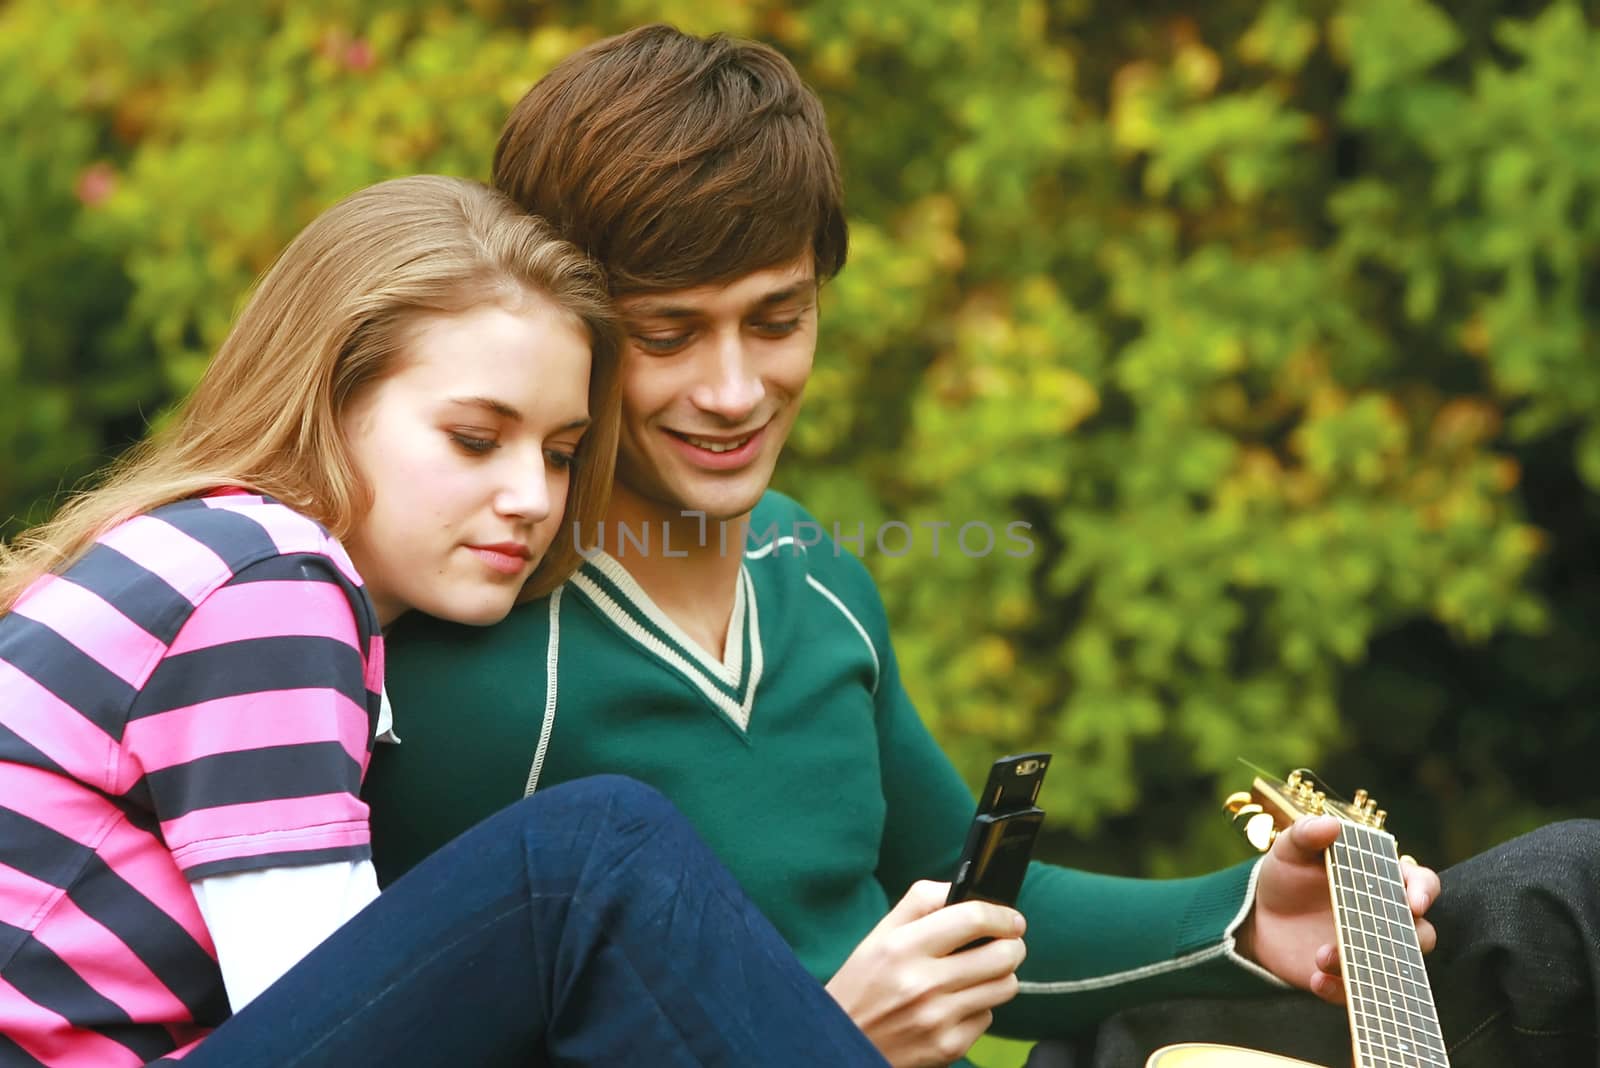 Romantic young couple relaxing outdoors in park smiling 